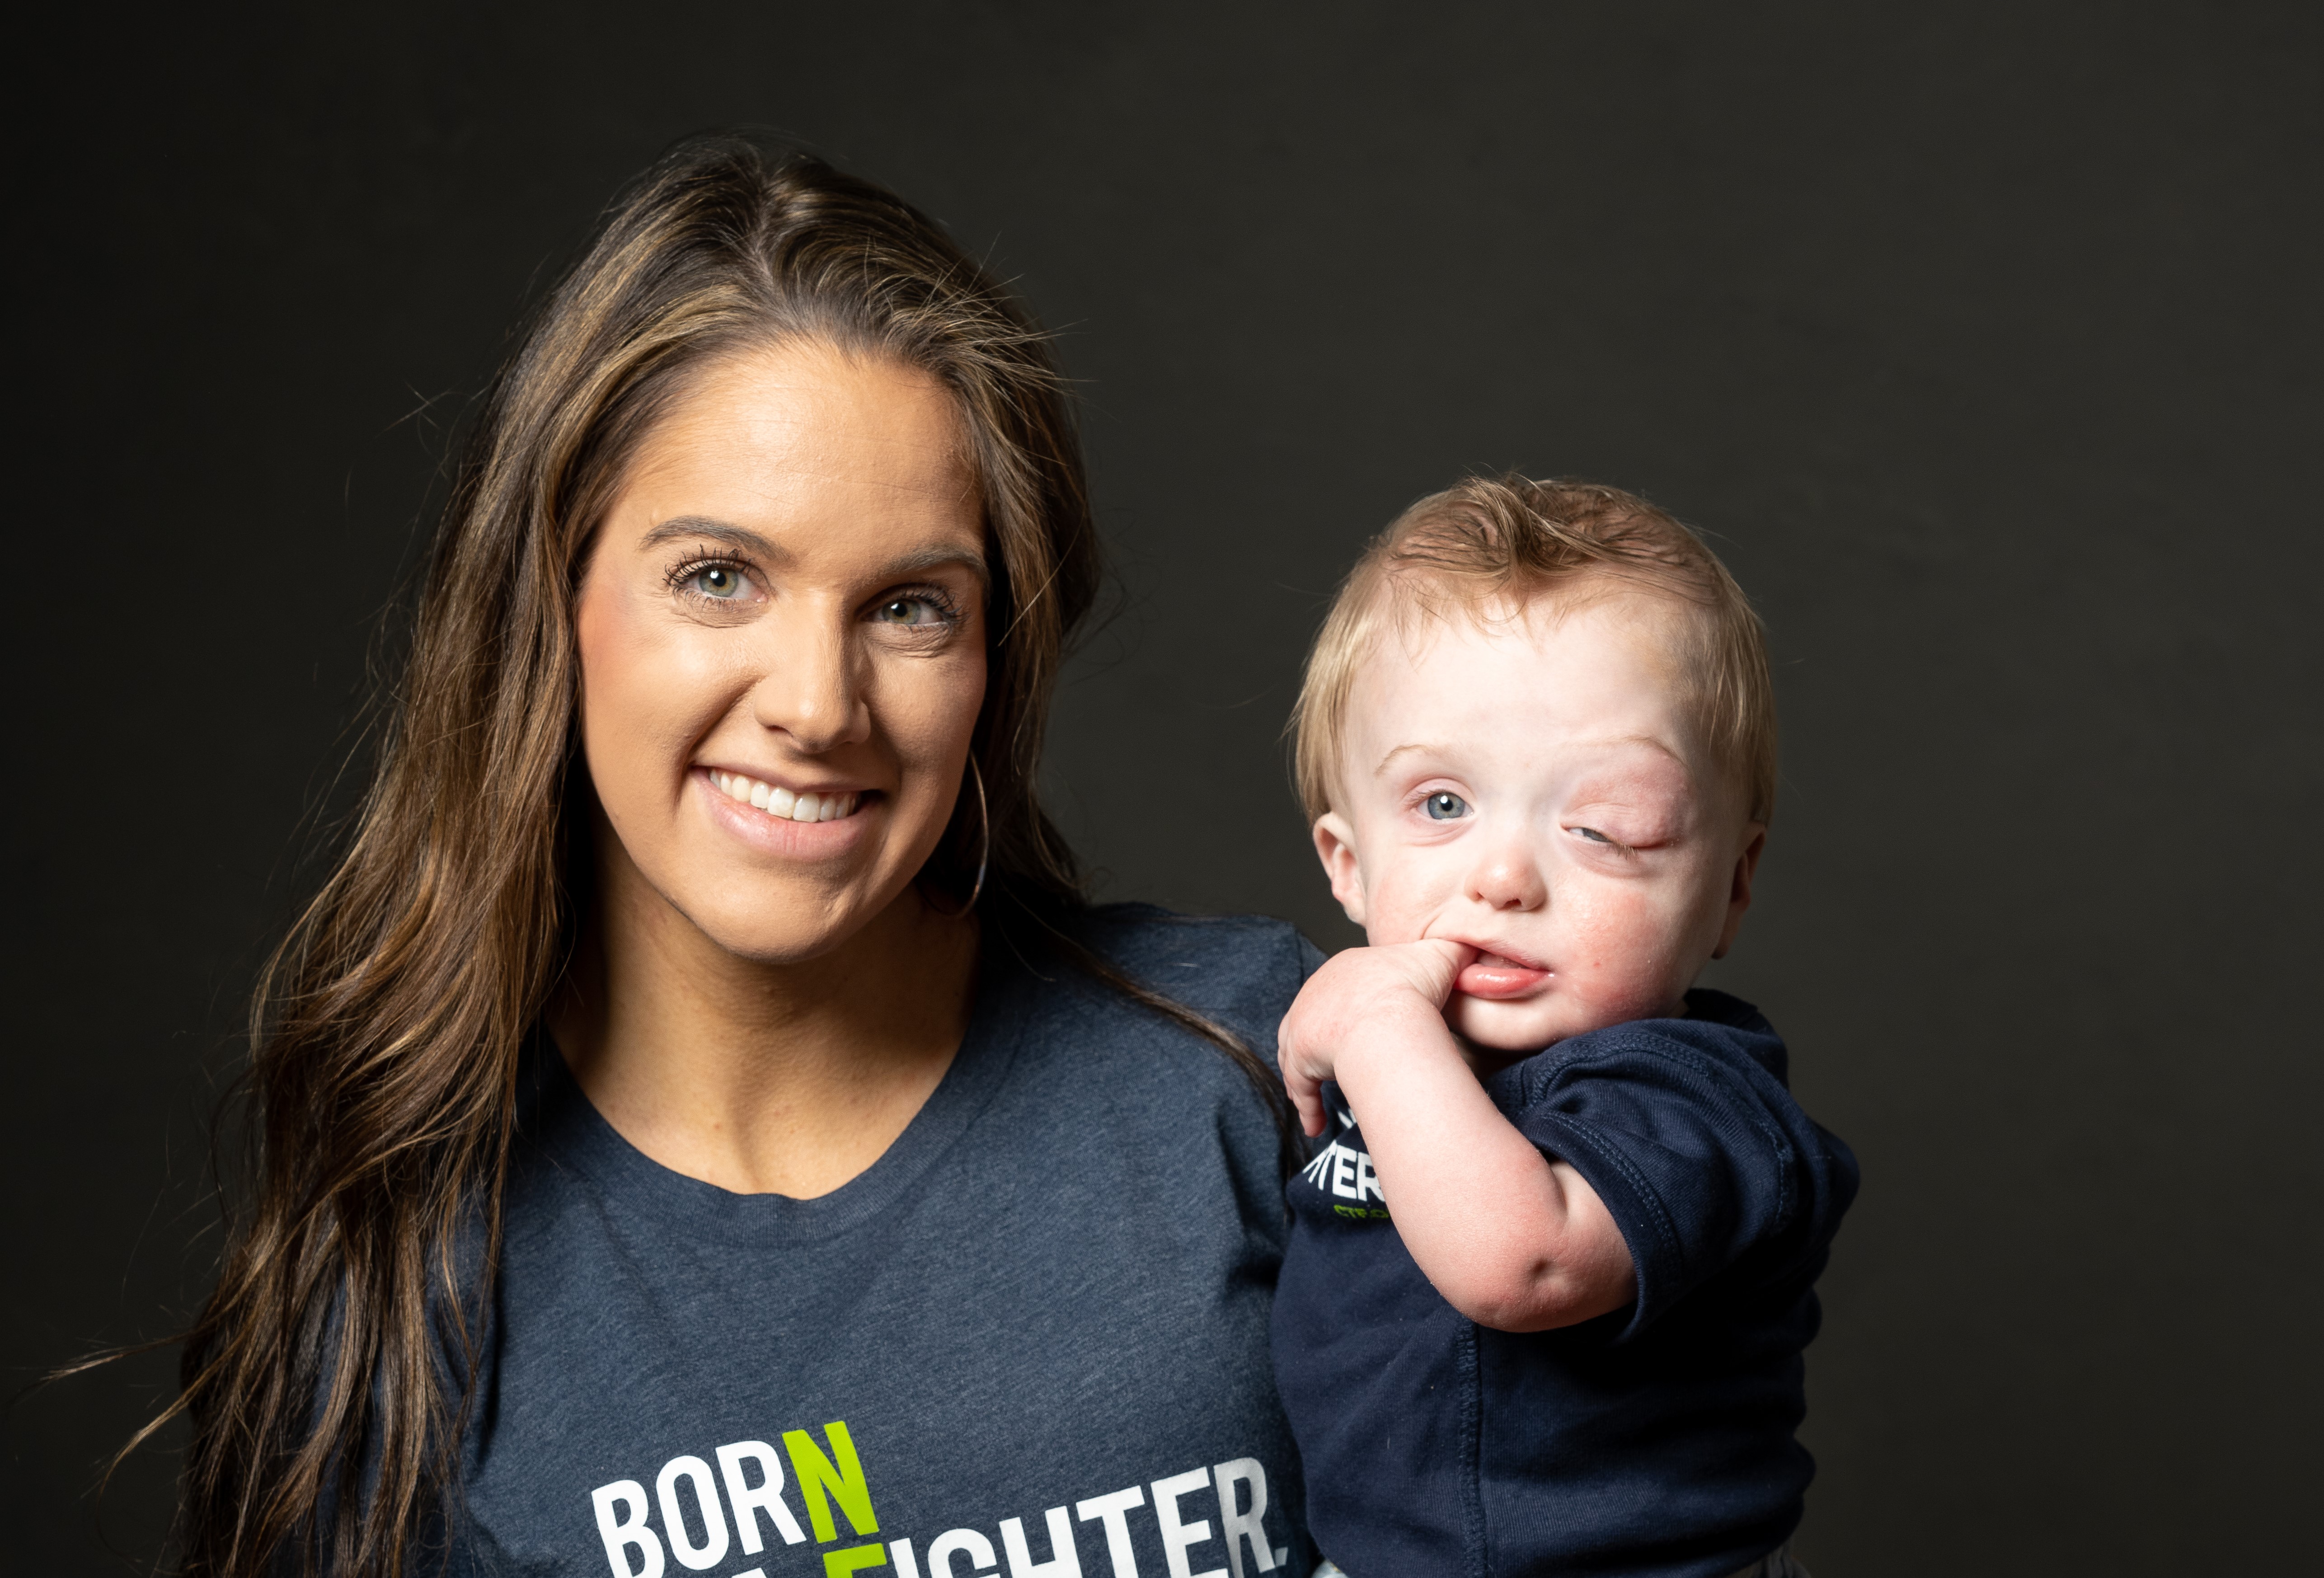 Lindsey and her son Bryson are living with NF. Image credit: the Children's Tumor Foundation